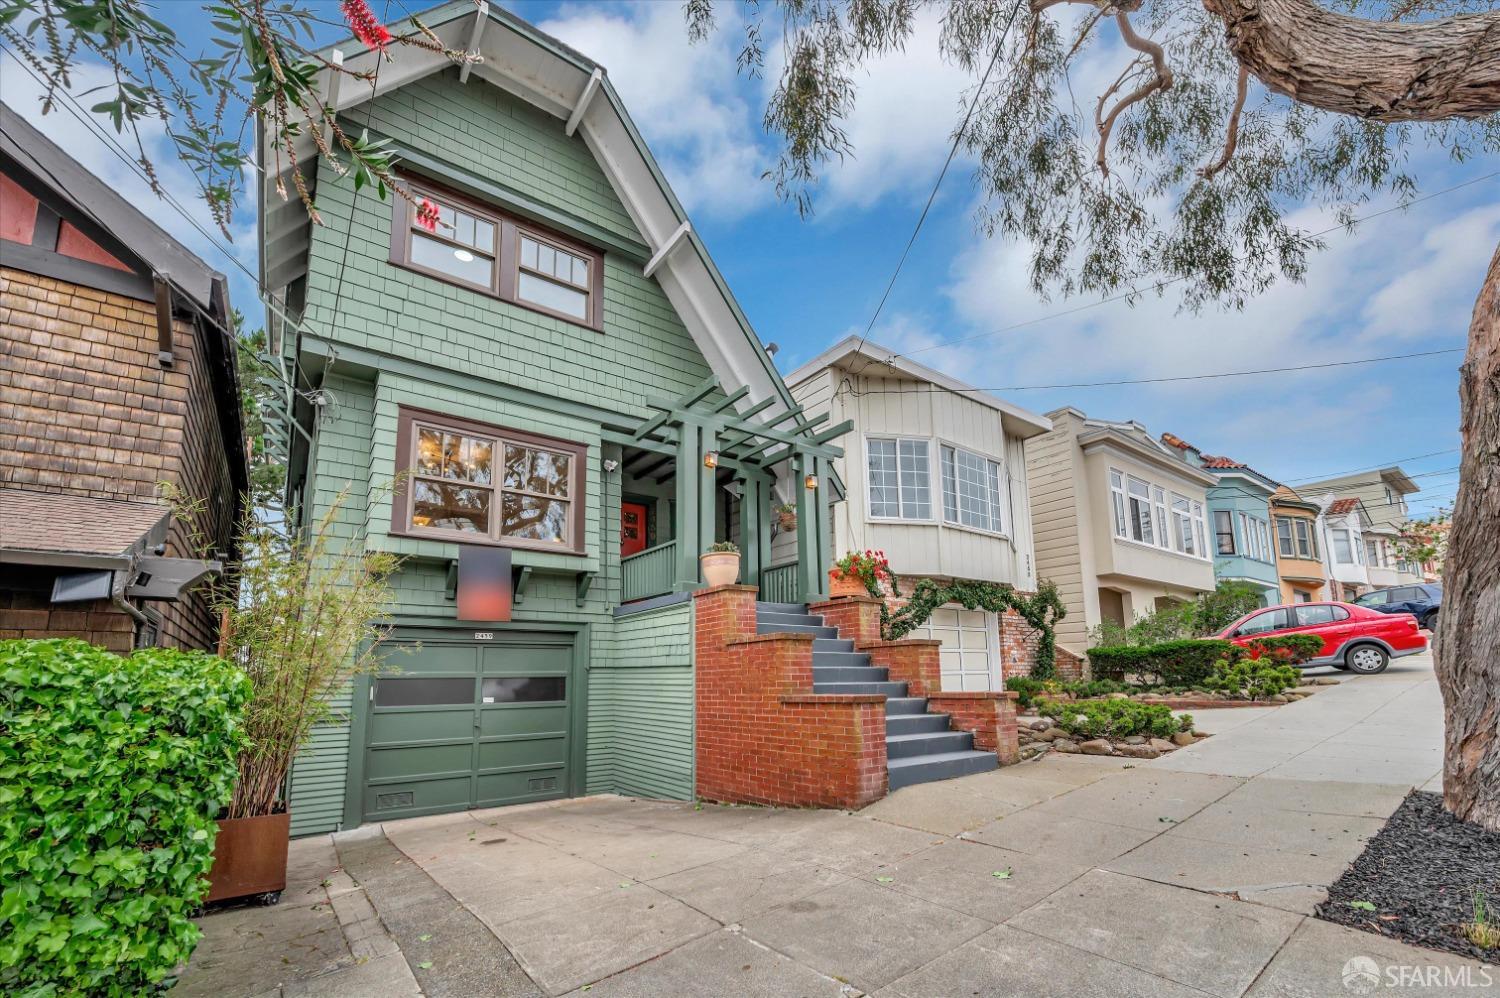 Photo of 2459 27th Ave in San Francisco, CA